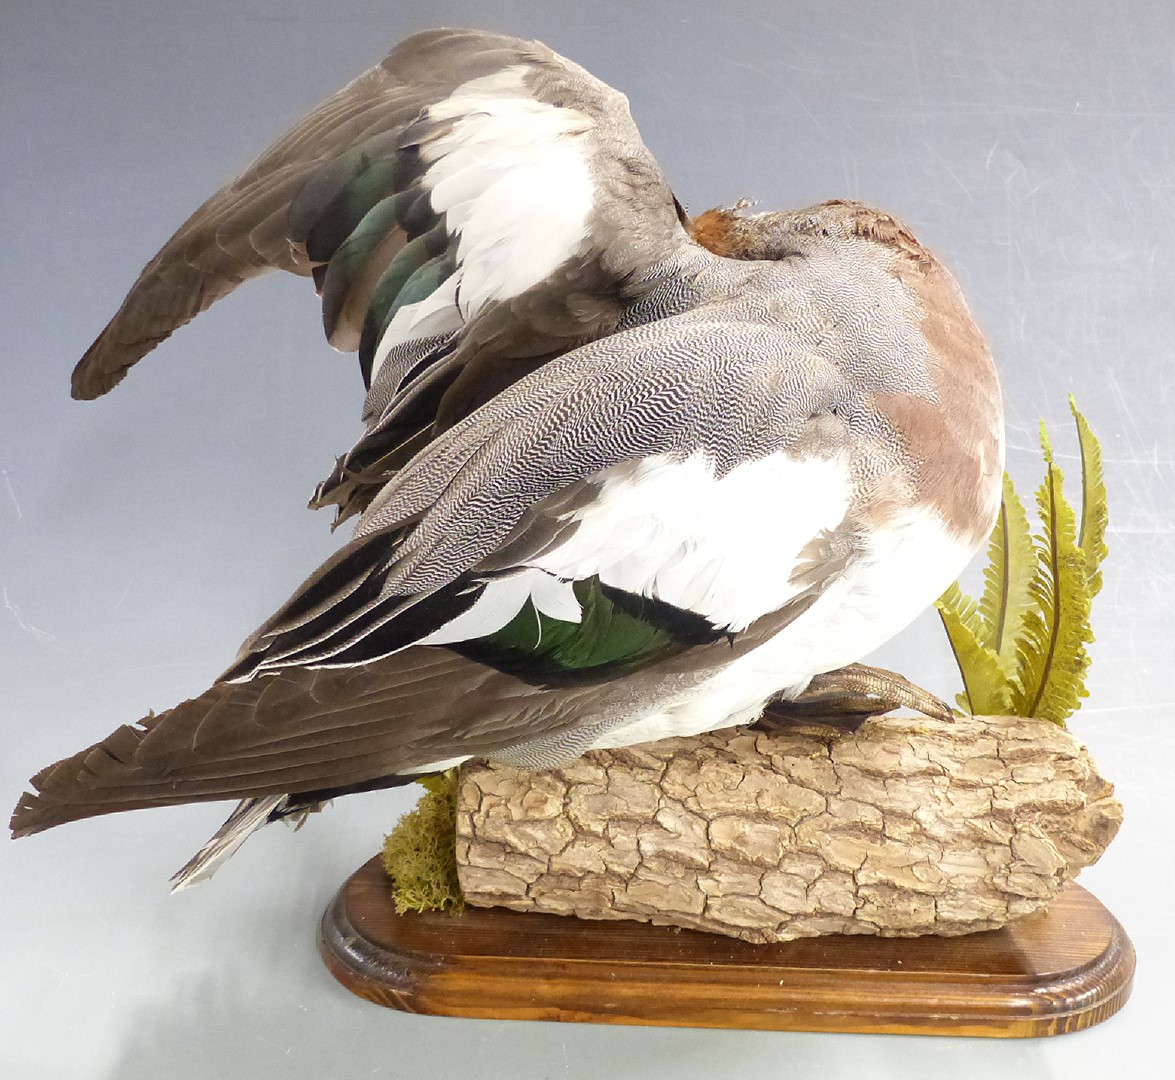 Taxidermy study of a Widgeon duck raised on a log with two ferns, H27cm - Image 3 of 4